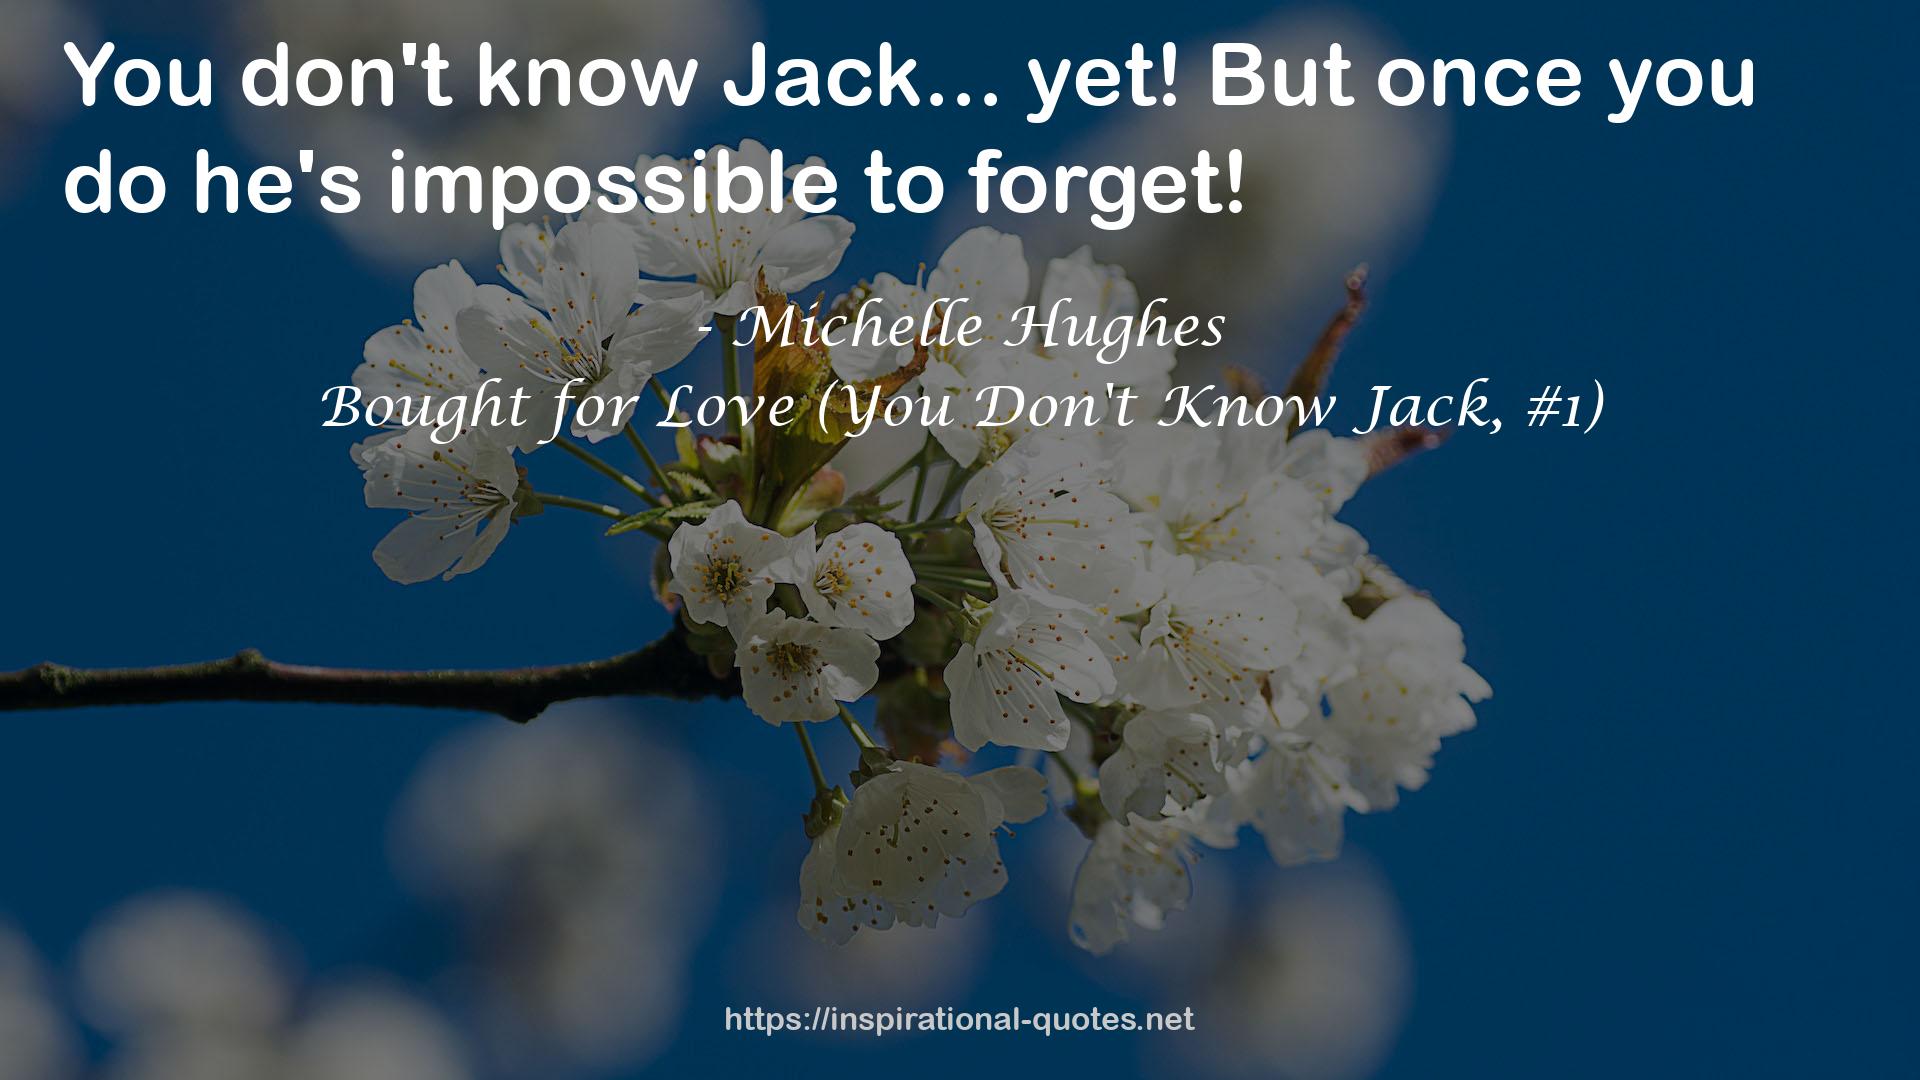 Bought for Love (You Don't Know Jack, #1) QUOTES